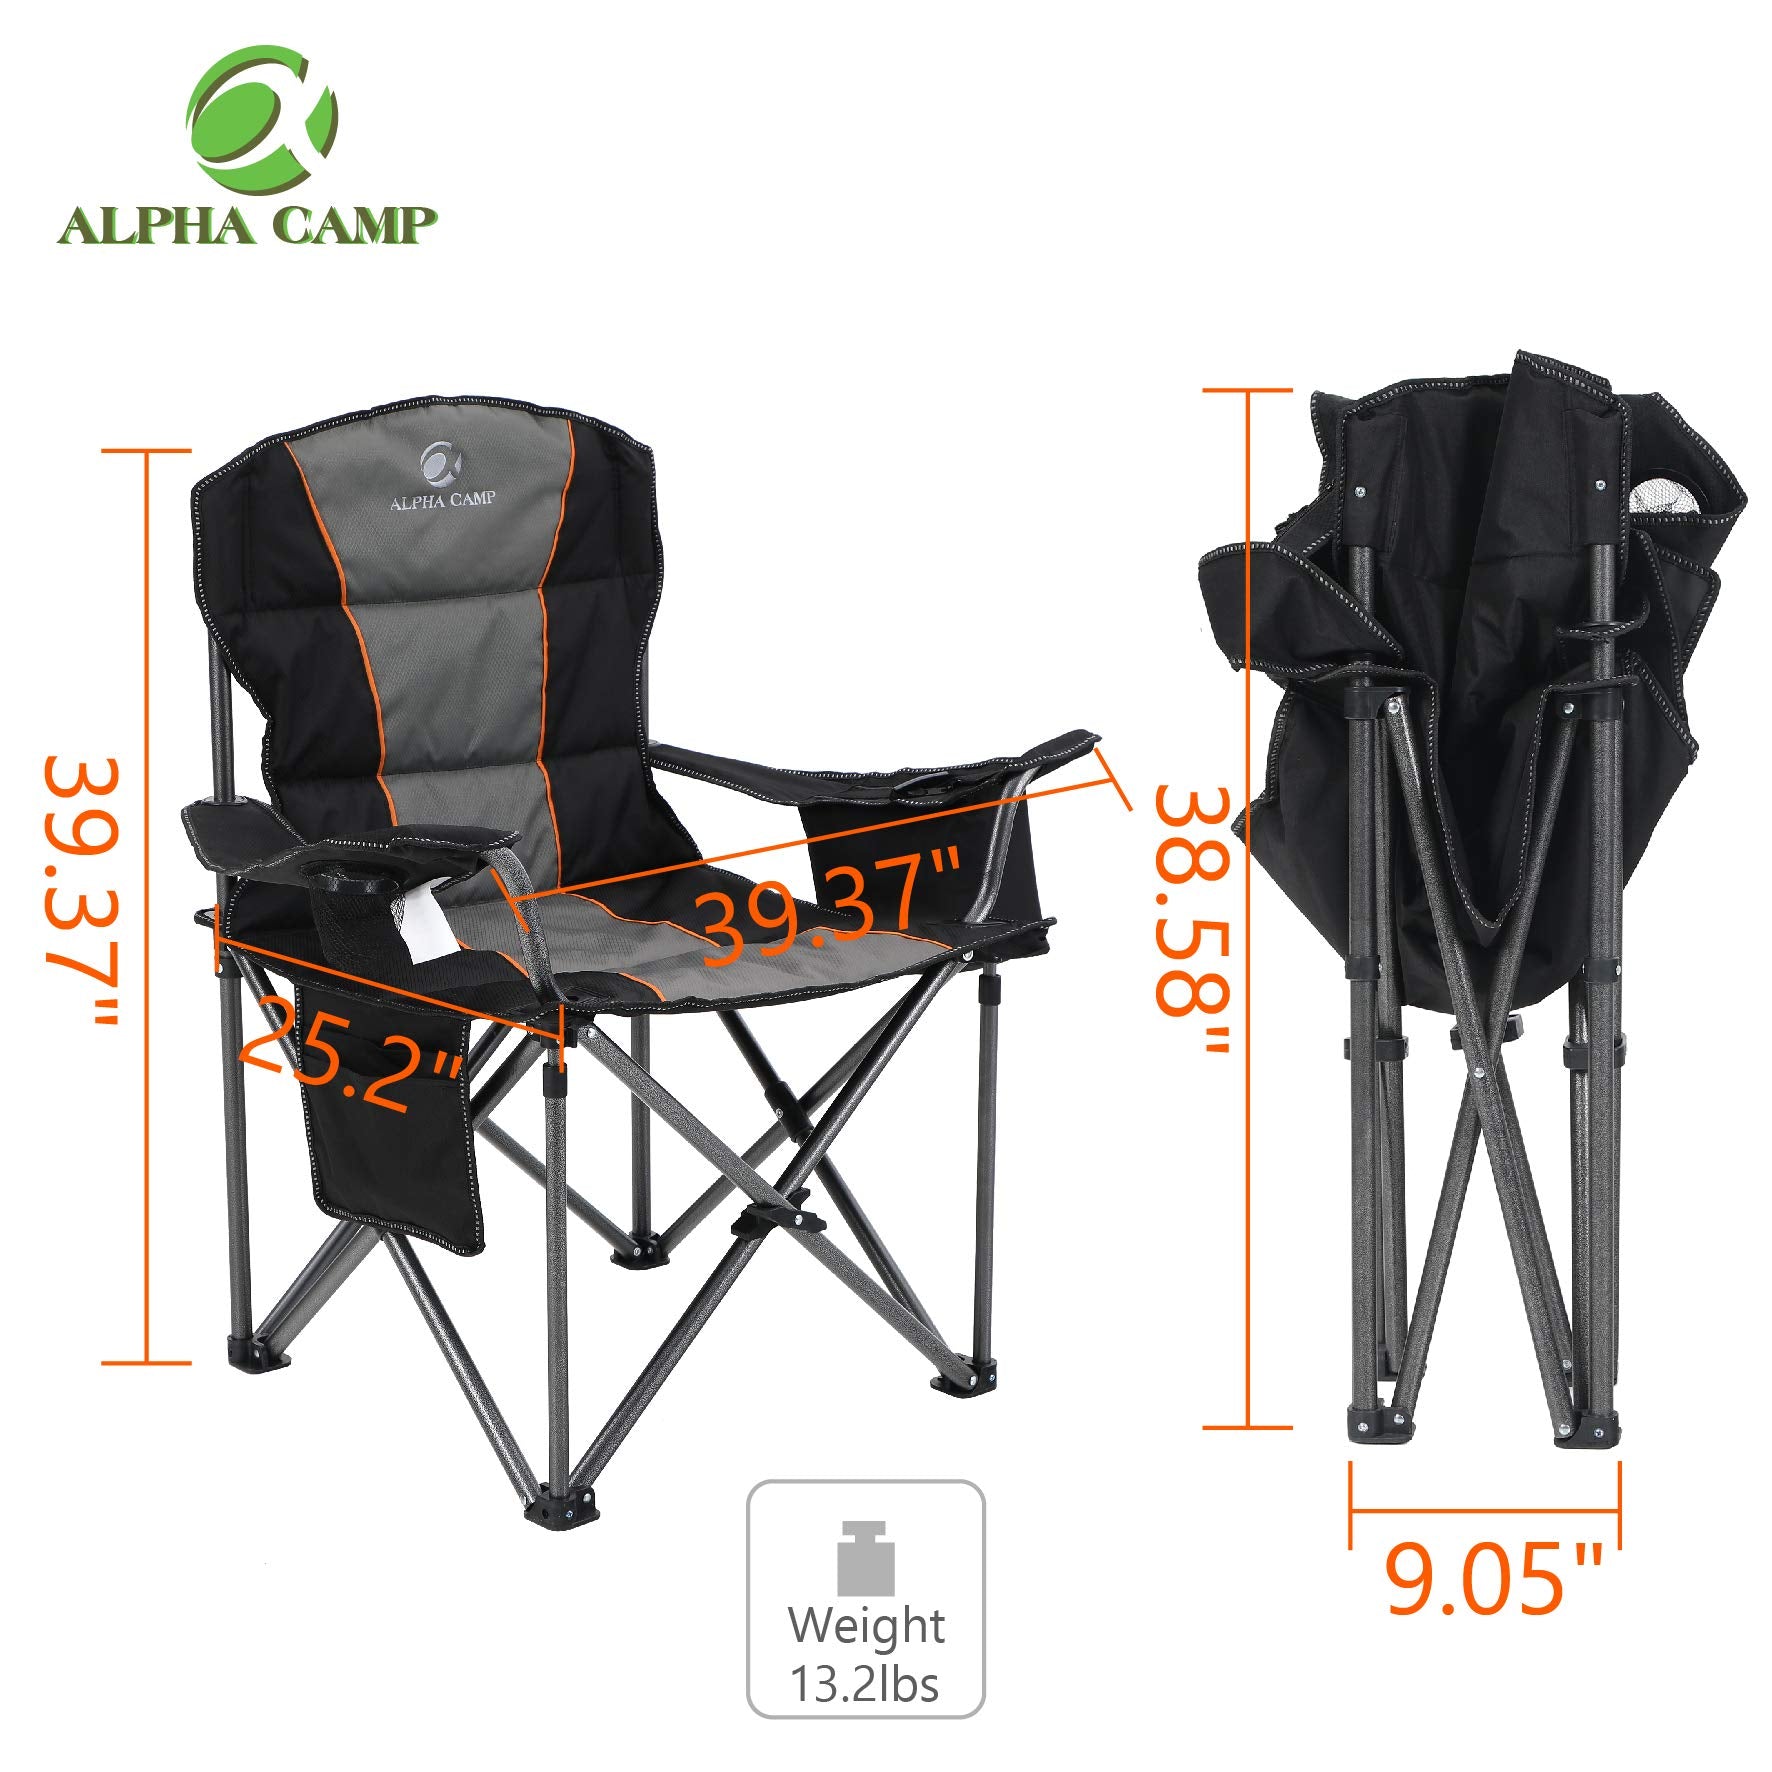 Alpha Camp - Camping and Sports Eqiupment Collection